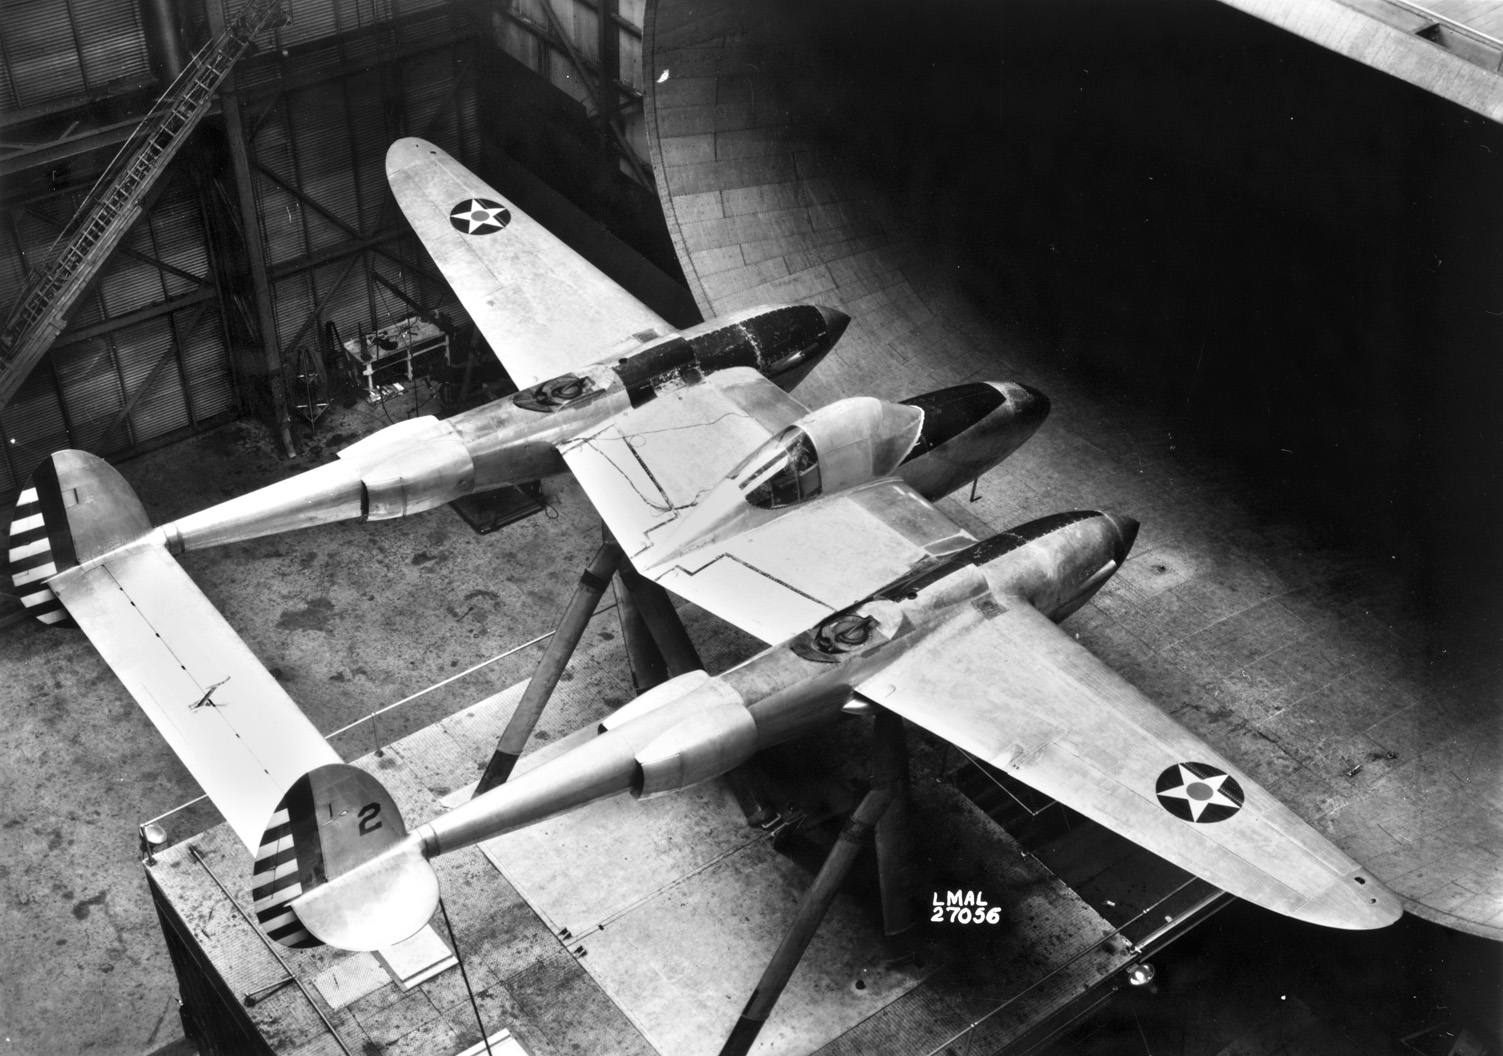 The prototype YP-38 fighter undergoes wind tunnel tests at Lockheed facilities. Engineers with Lockheed developed the twin-engine configuration for the P-38 Lightning to meet the specifications set out by the U.S. Army Air Corps in 1937.